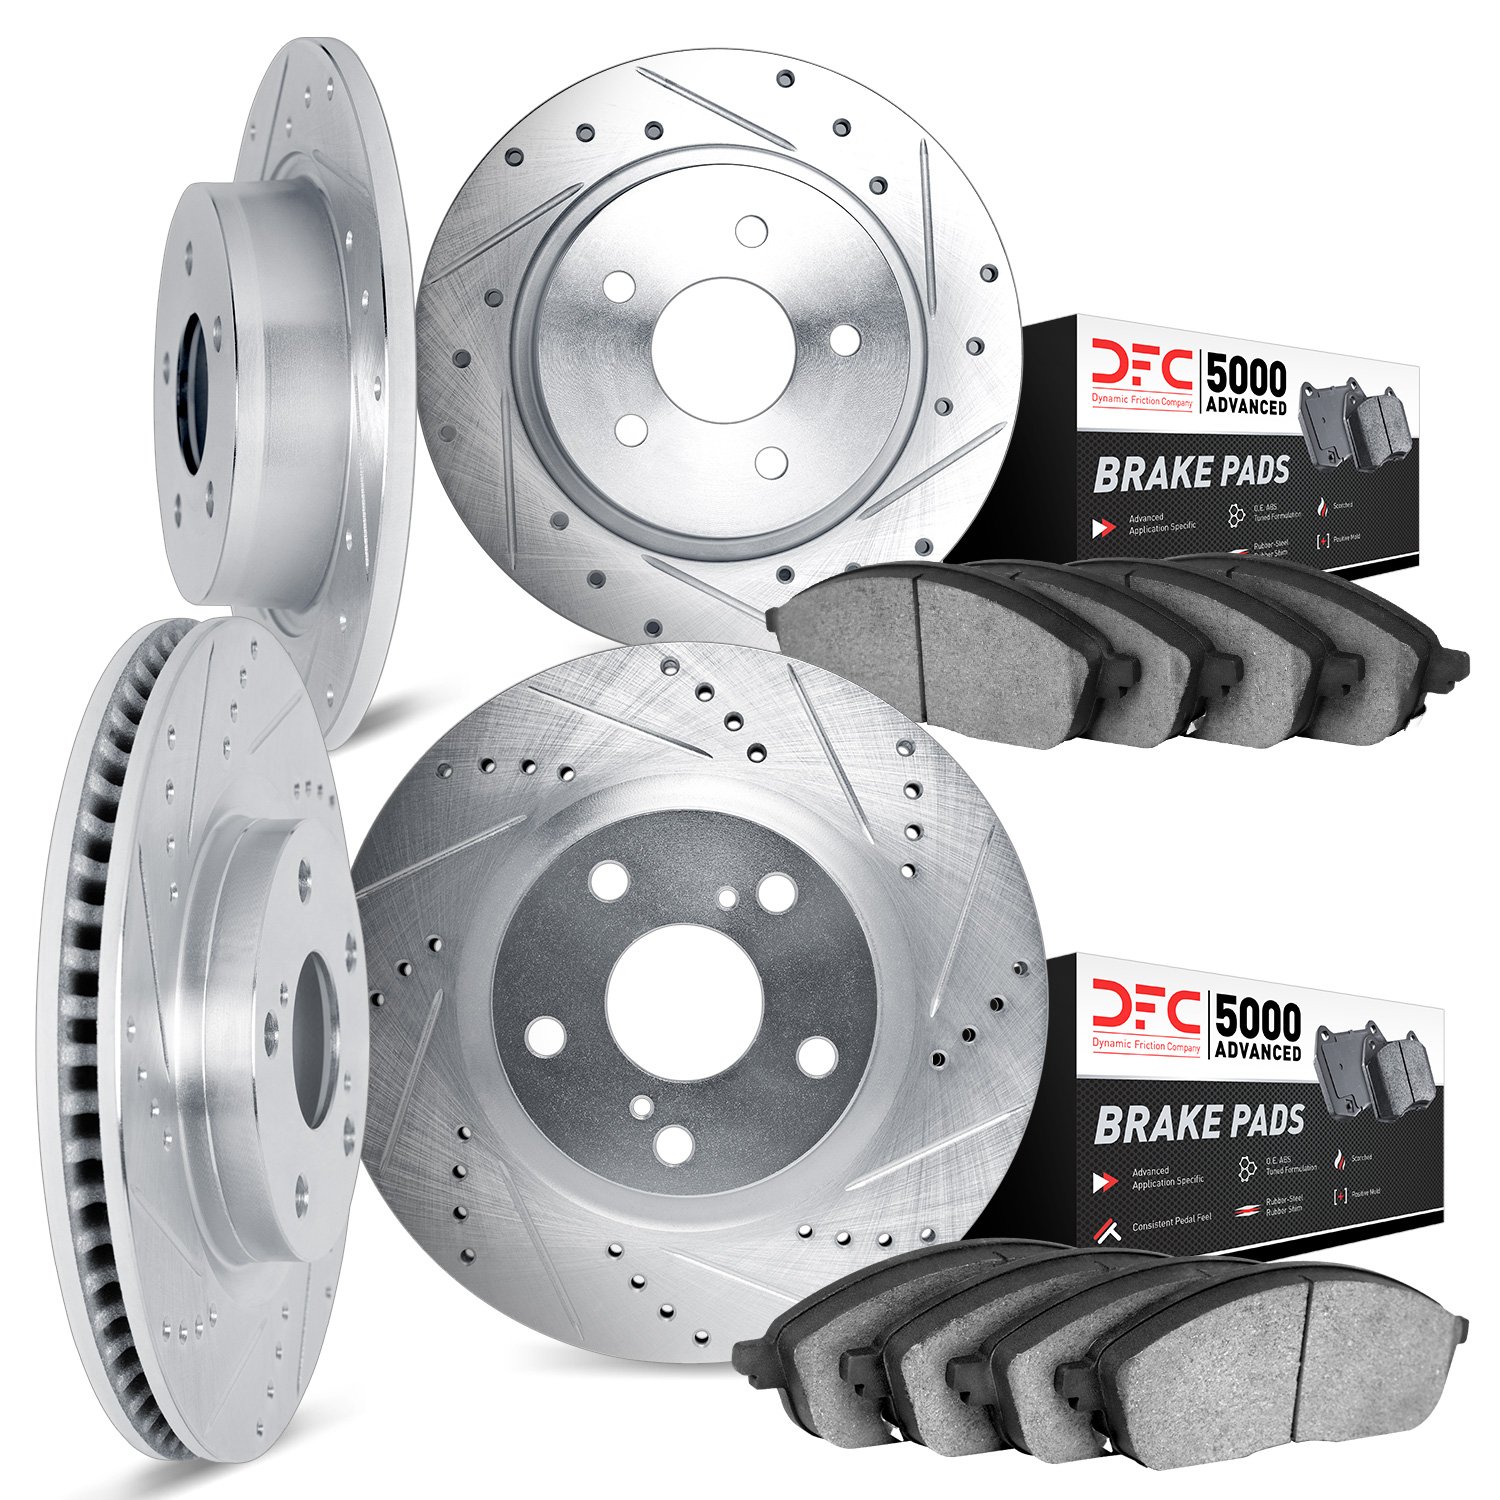 7504-40235 Drilled/Slotted Brake Rotors w/5000 Advanced Brake Pads Kit [Silver], 2001-2007 Mopar, Position: Front and Rear